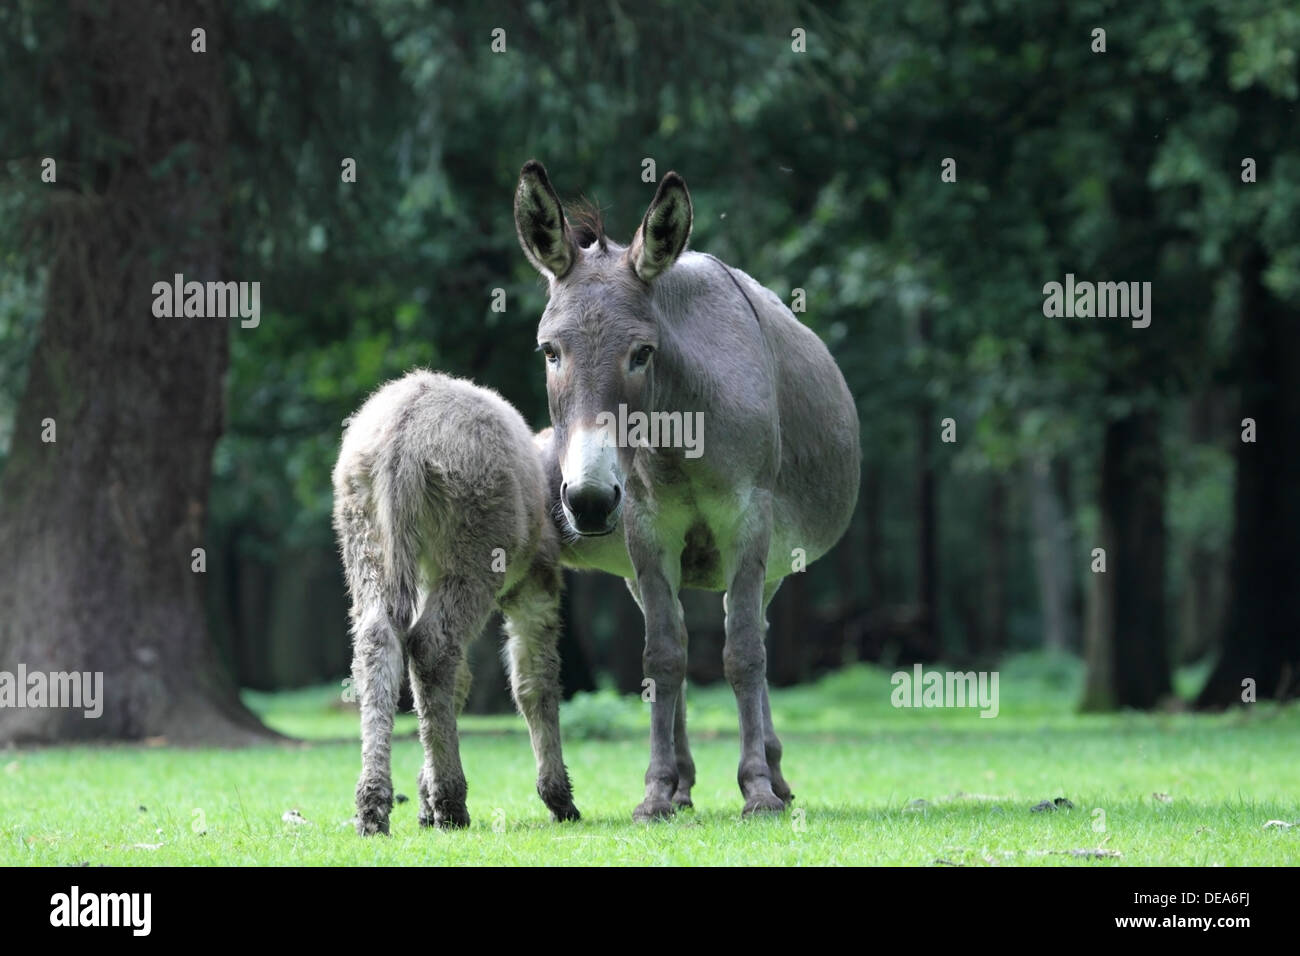 Donkey suckles its young, Germany Stock Photo